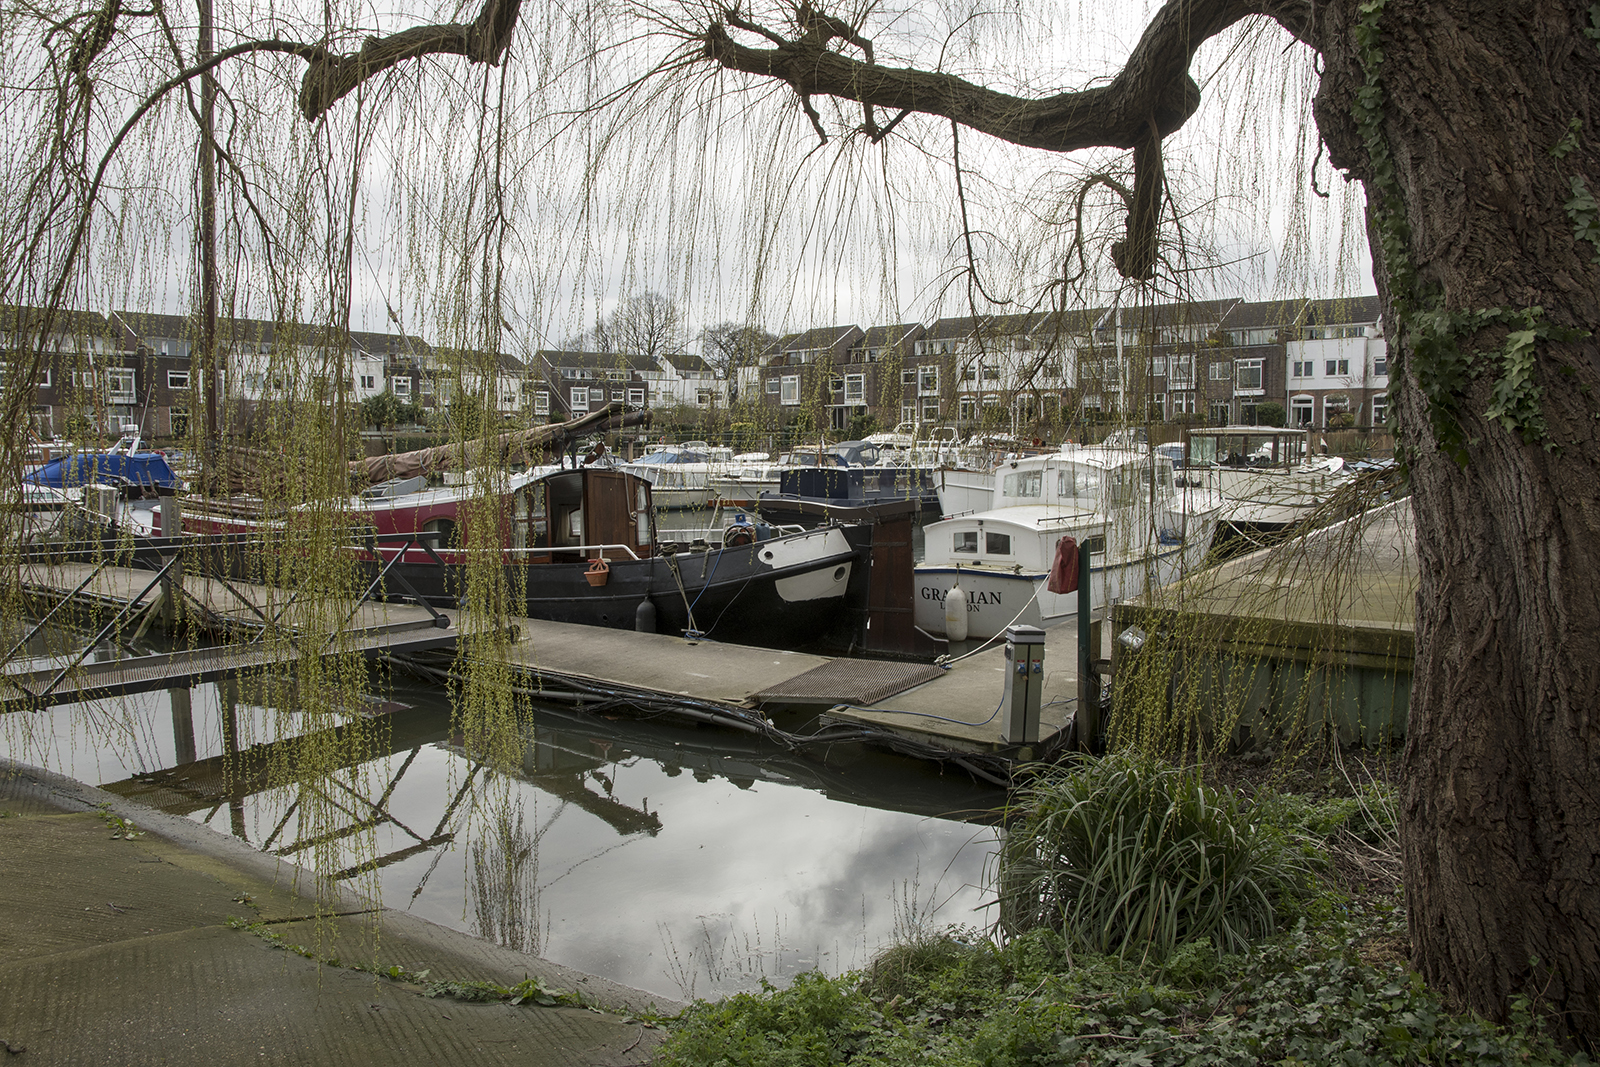 20170308_Hammersmith-and-Fulham_Chiswick-Quay_Landscape_Winter_Boats-in-the-Basin